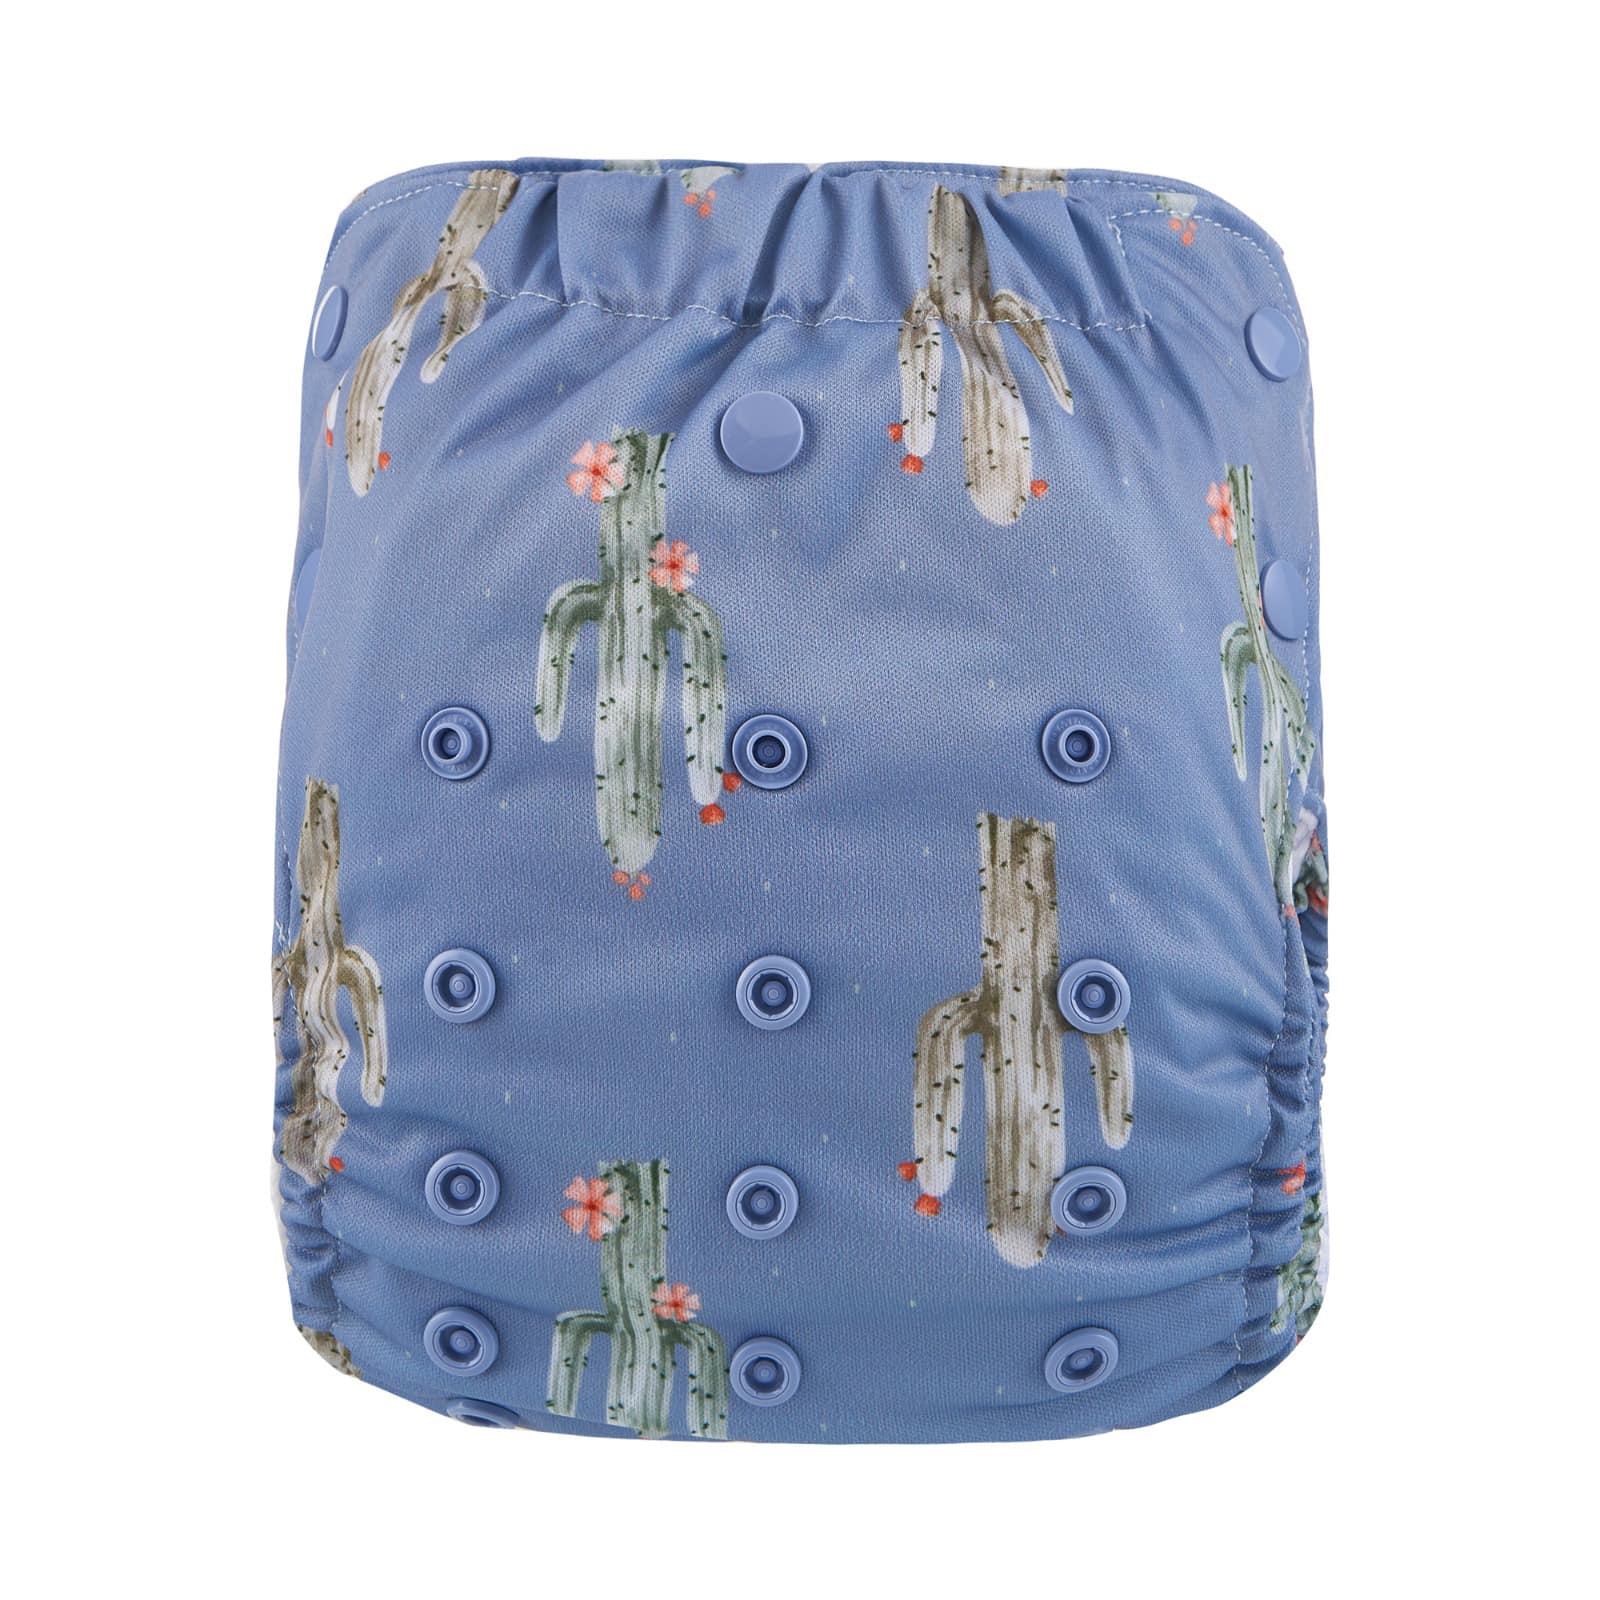 Reusable cloth nappy pull up with a blue cactus print.